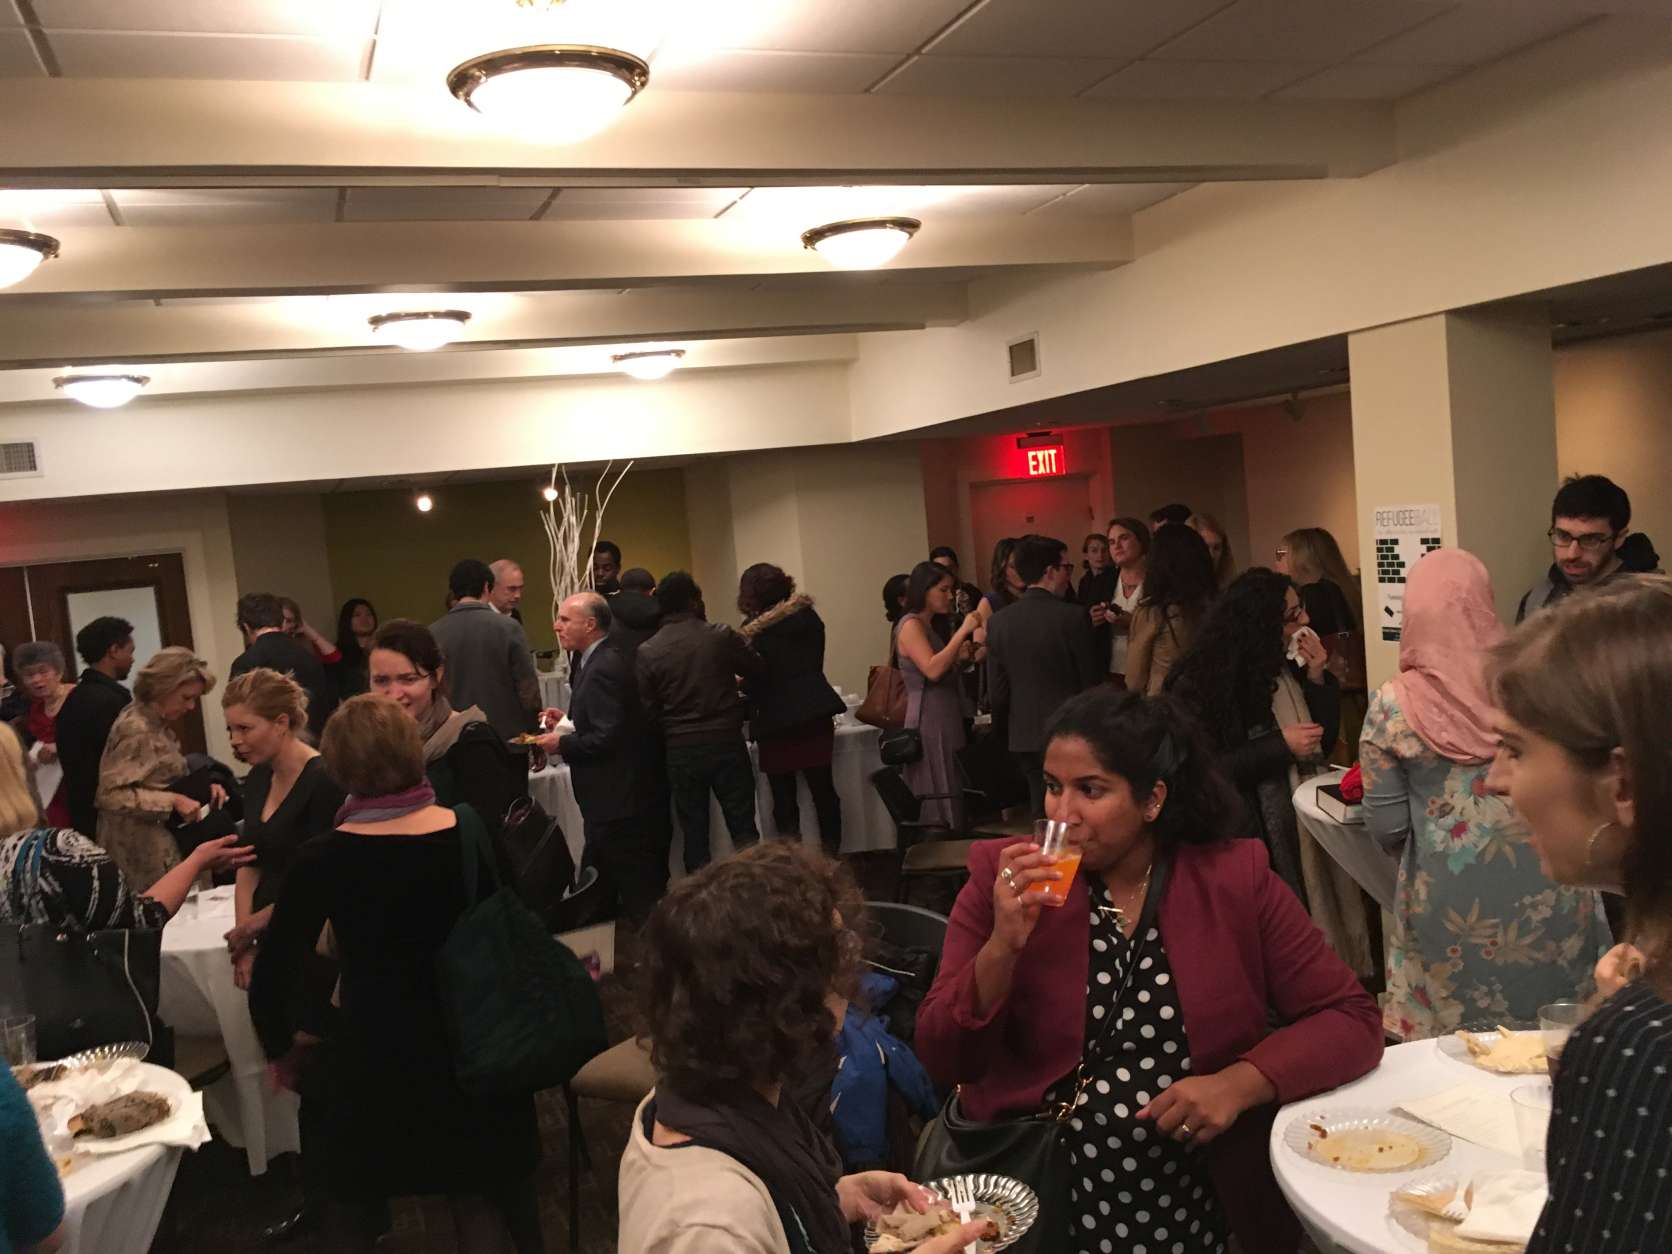 A packed downstairs social hall at Tuesday night's Refugee Ball, an event to show solidarity with members of refugee and immigrant communities and to educate the public about their contributions  to society. (WTOP/Liz Anderson)